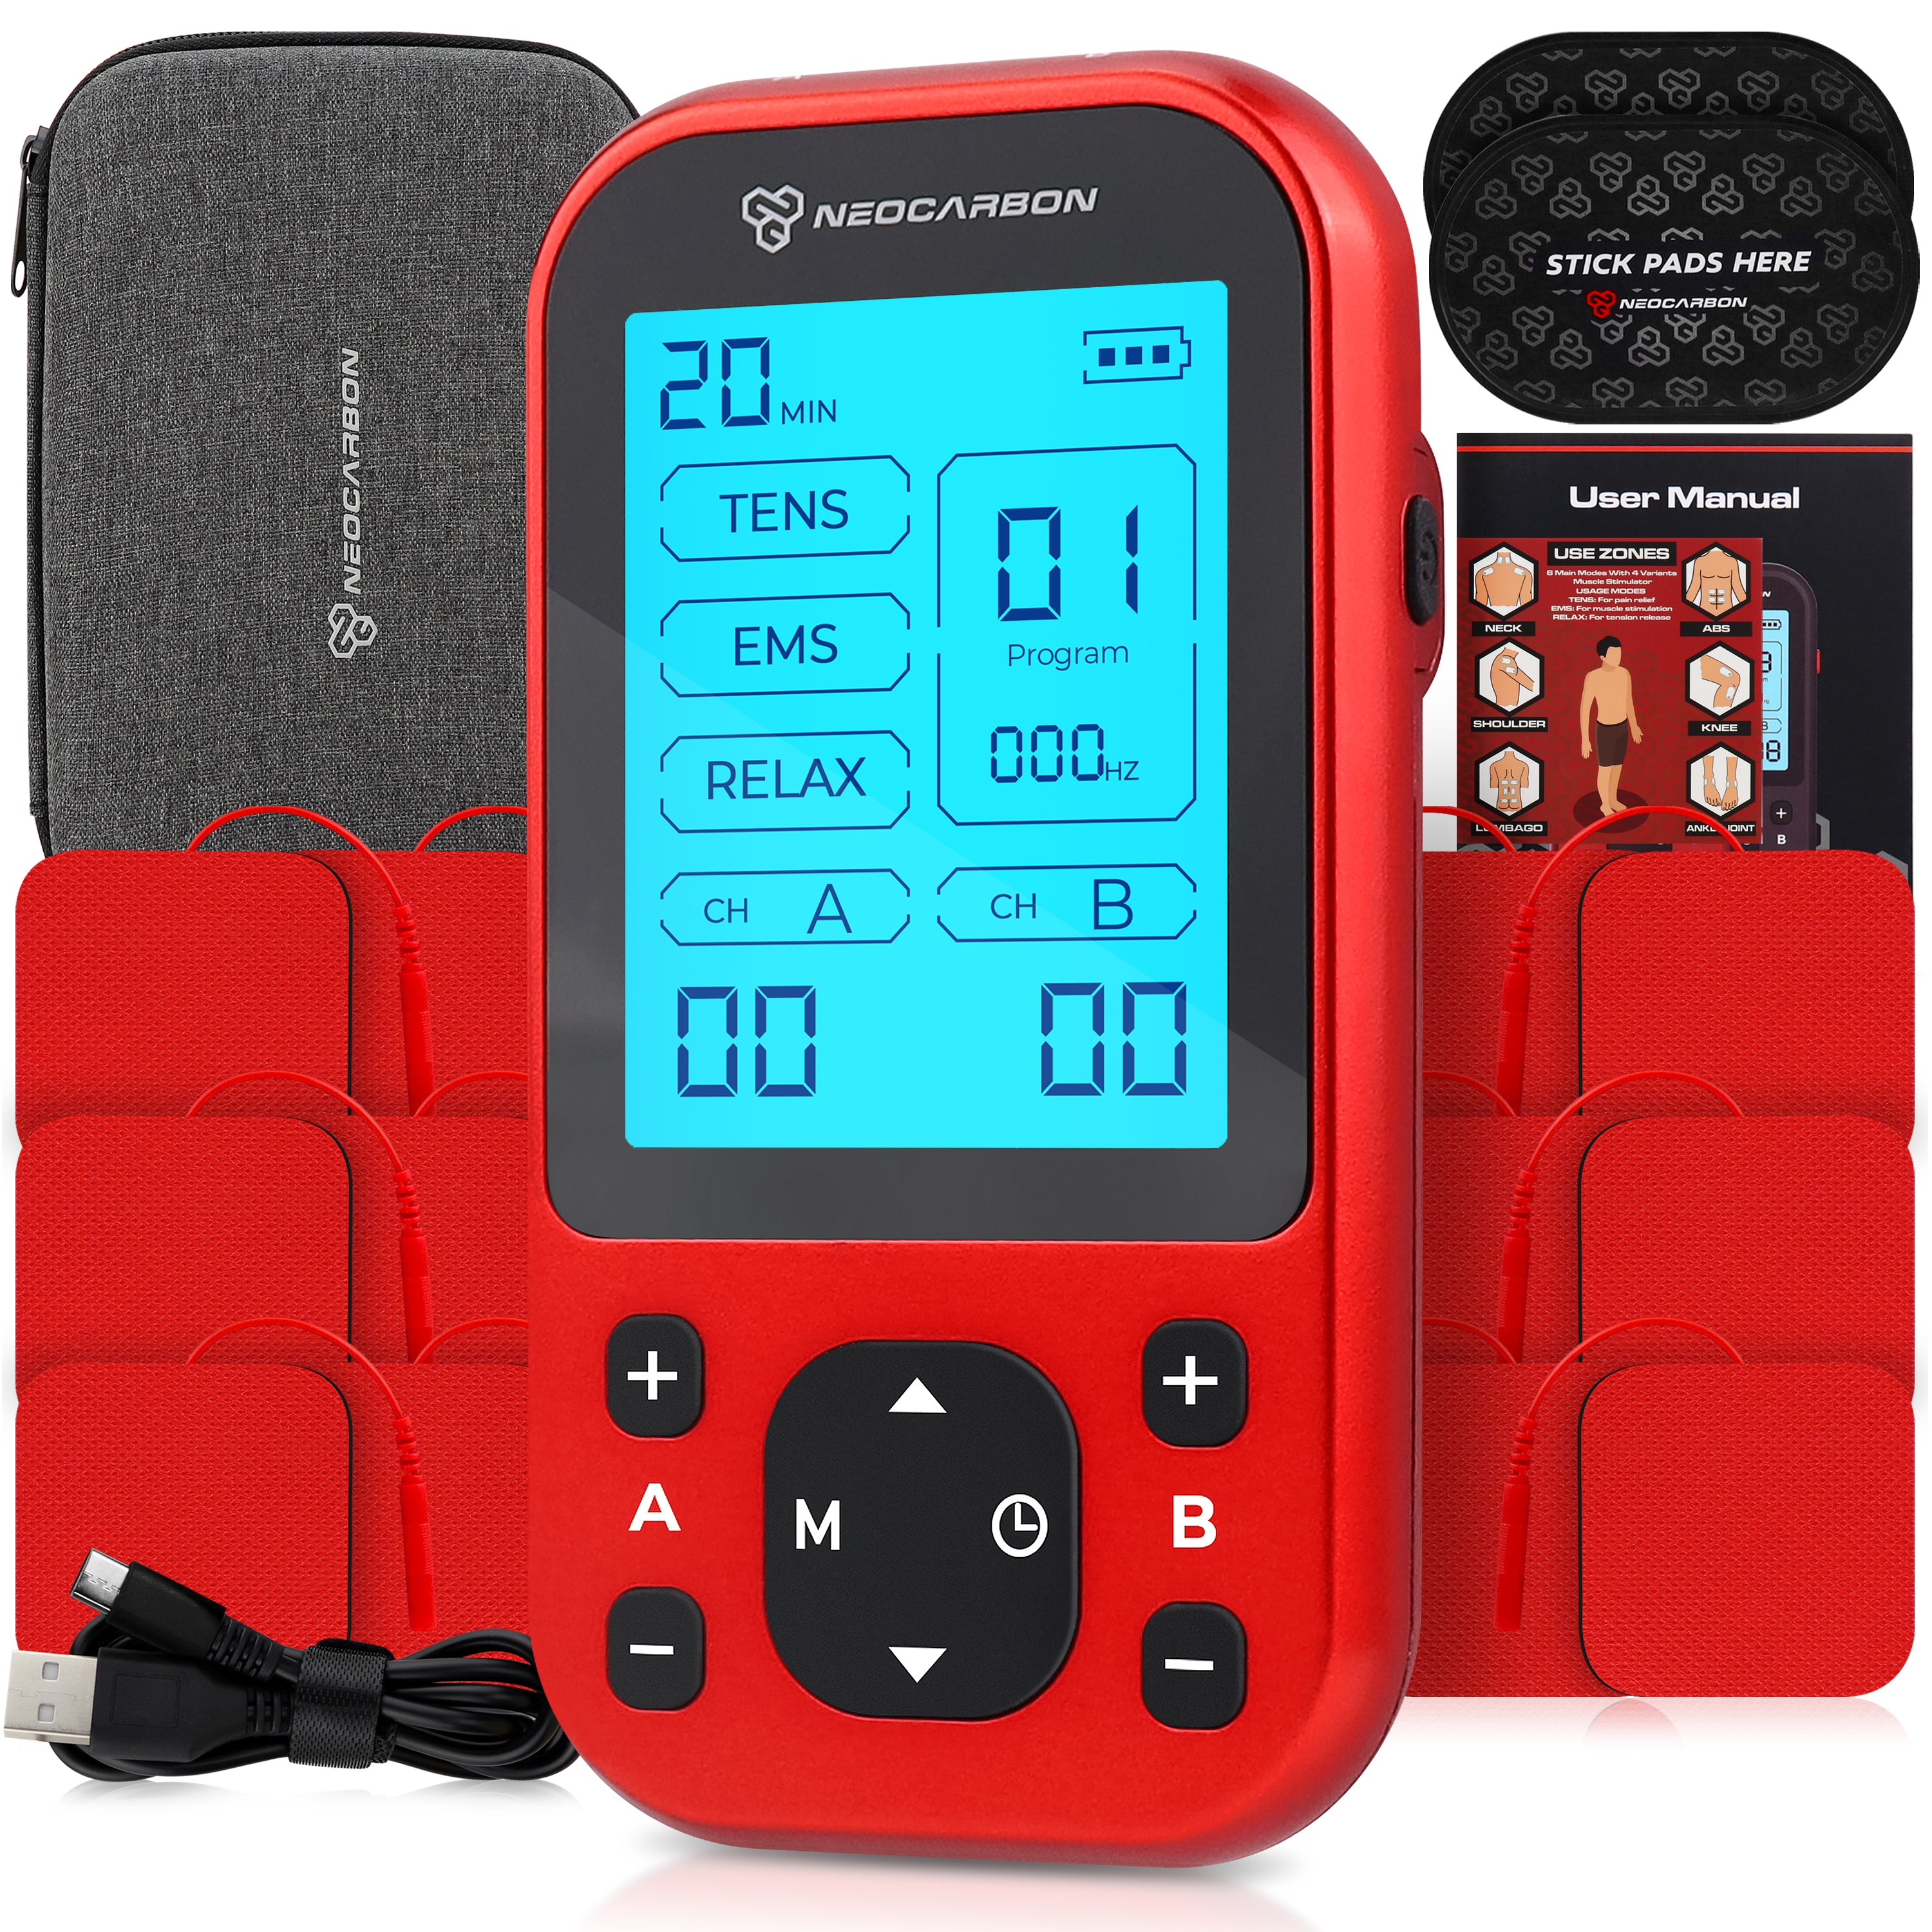 TENS PRO Machine for Muscles, Best Transcutaneous Electrical Nerve  Stimulator Unit for Back and Neck Pain, Electrode/Electronic Muscle  Stimulation (EMS), Buy Abs Stimulators Online